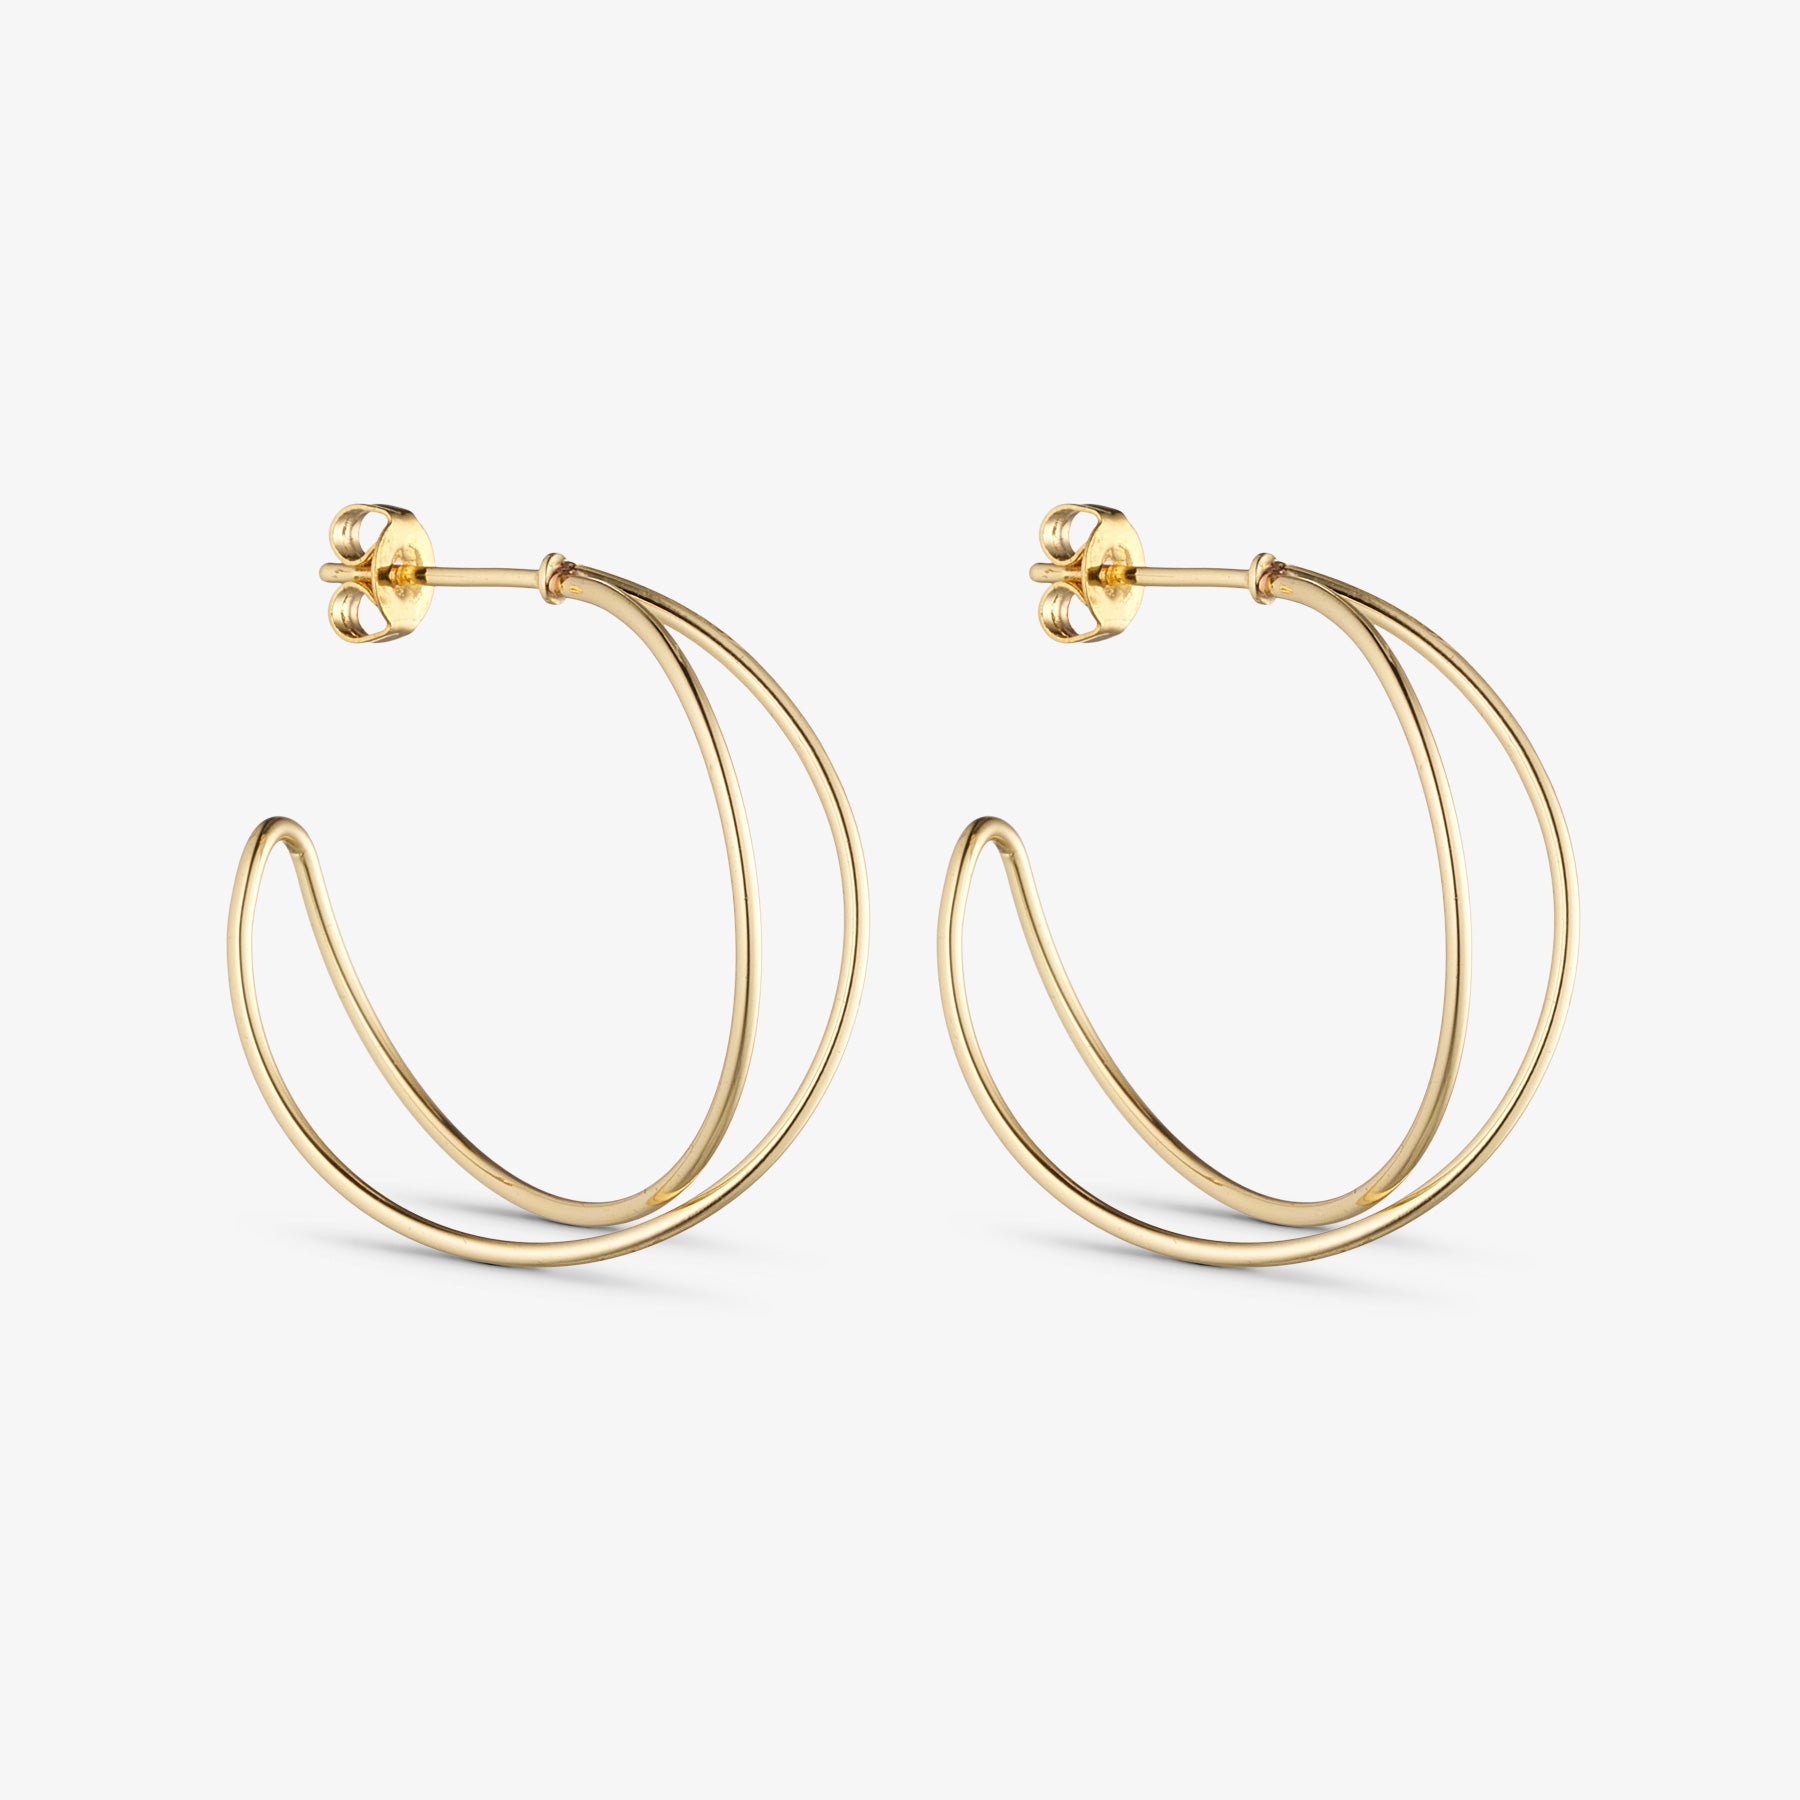 Mia Earrings LARGE - 18 carat gold plated